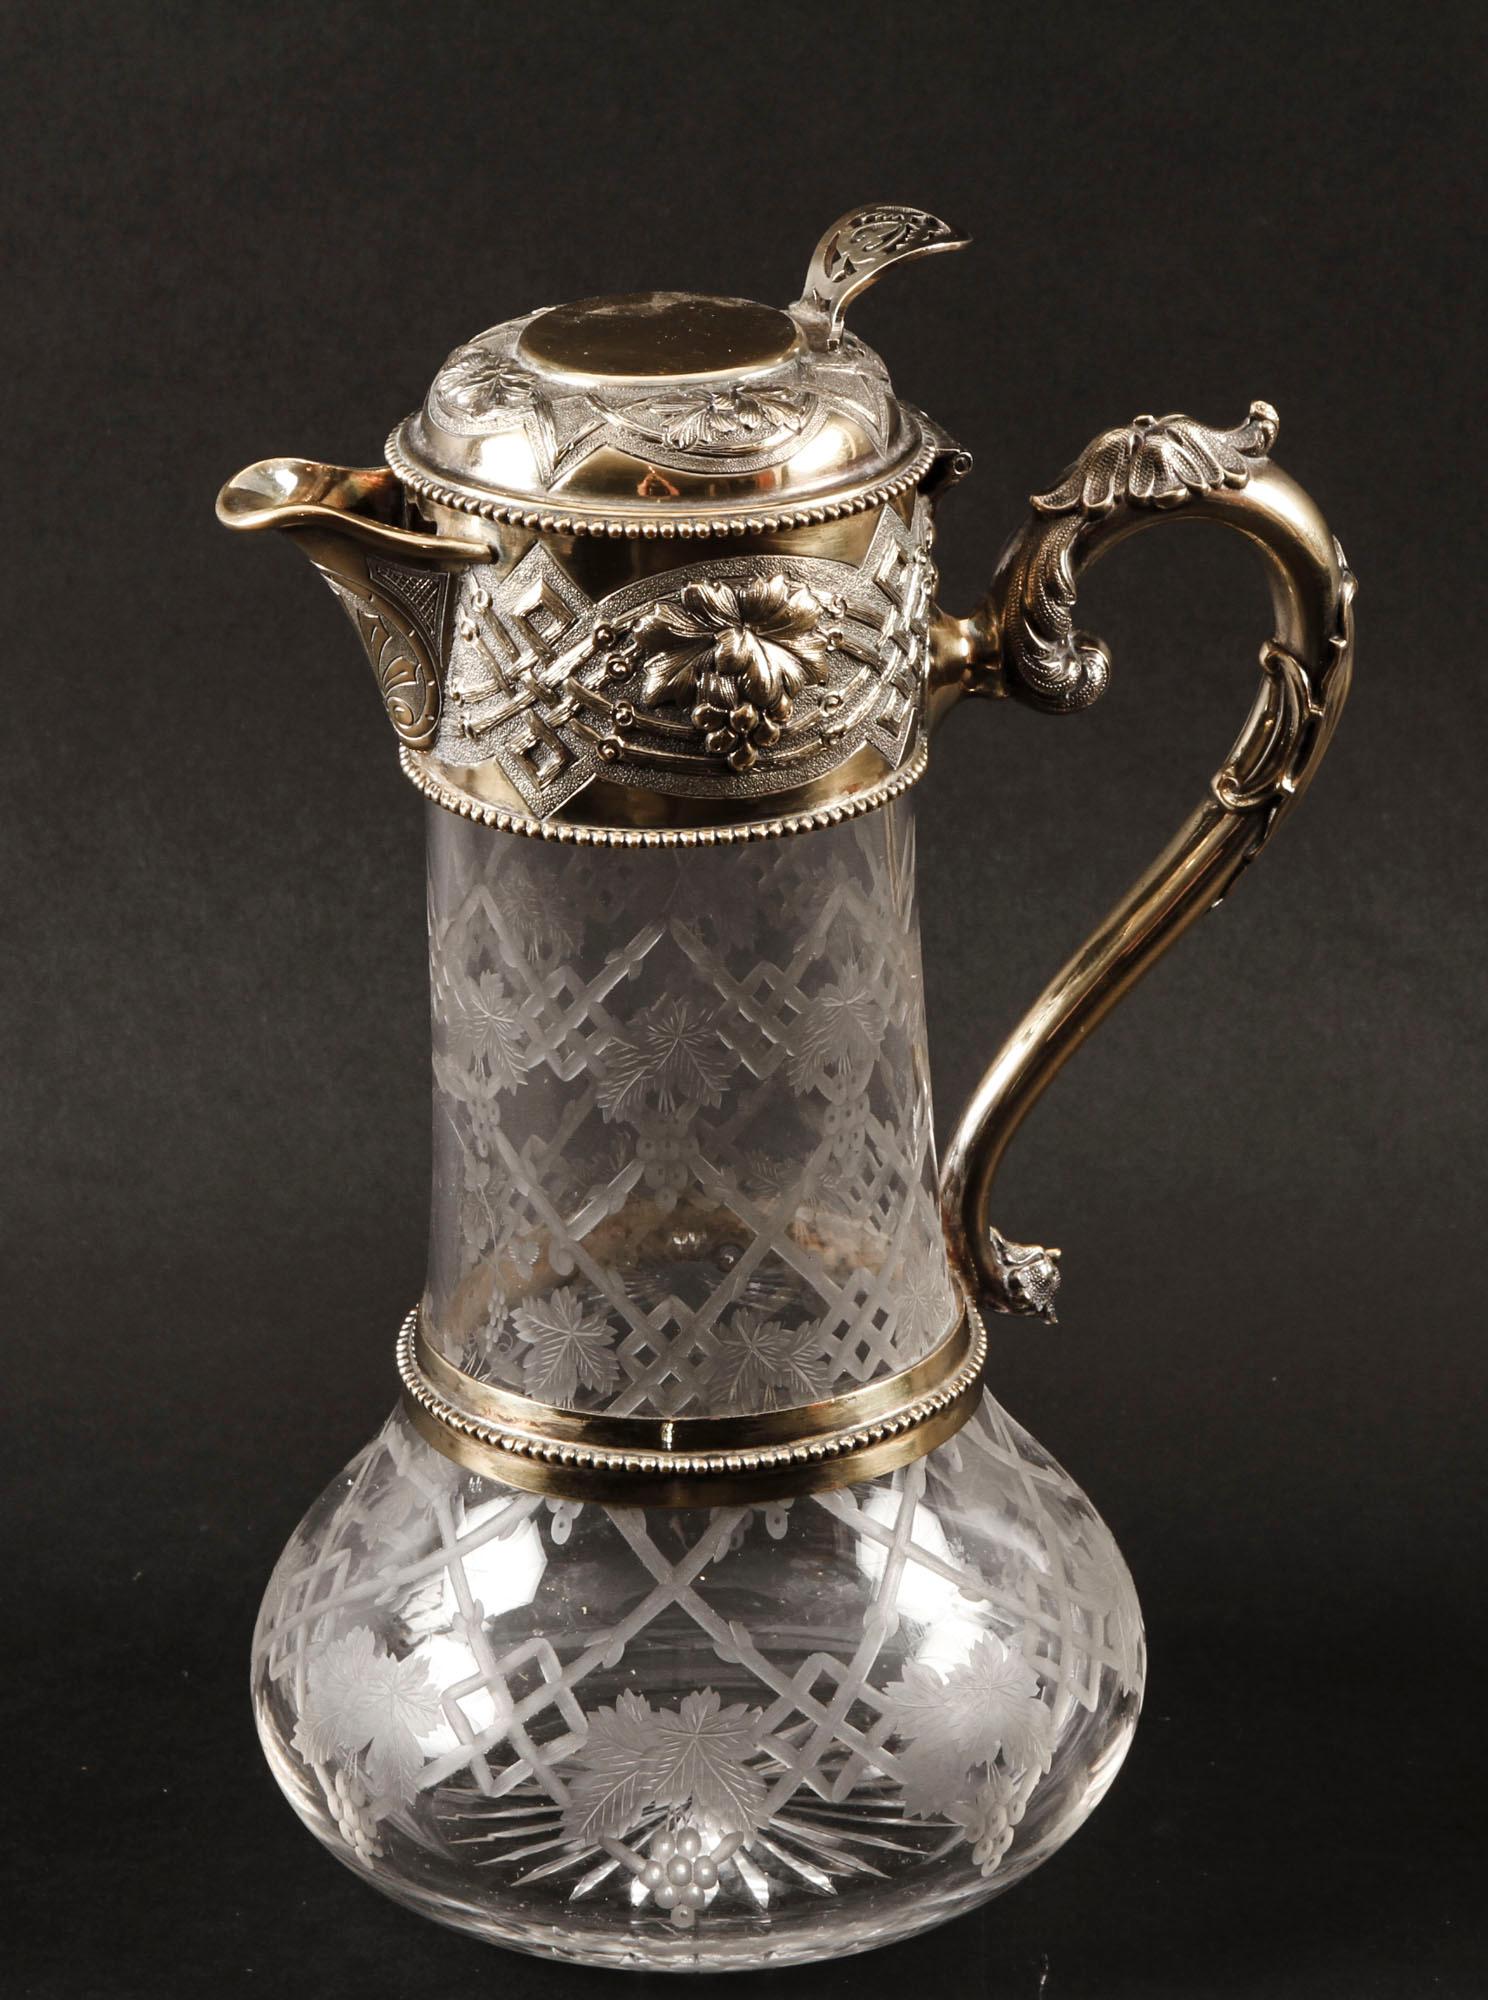 This is a wonderful antique Victorian sterling silver-gilt mounted claret jug, with makers mark for W&G Sissons and hallmarks for Sheffield 1873.

The silver-gilt mounted claret jug, beautifully chased and etched with strapwork and fruiting vine,